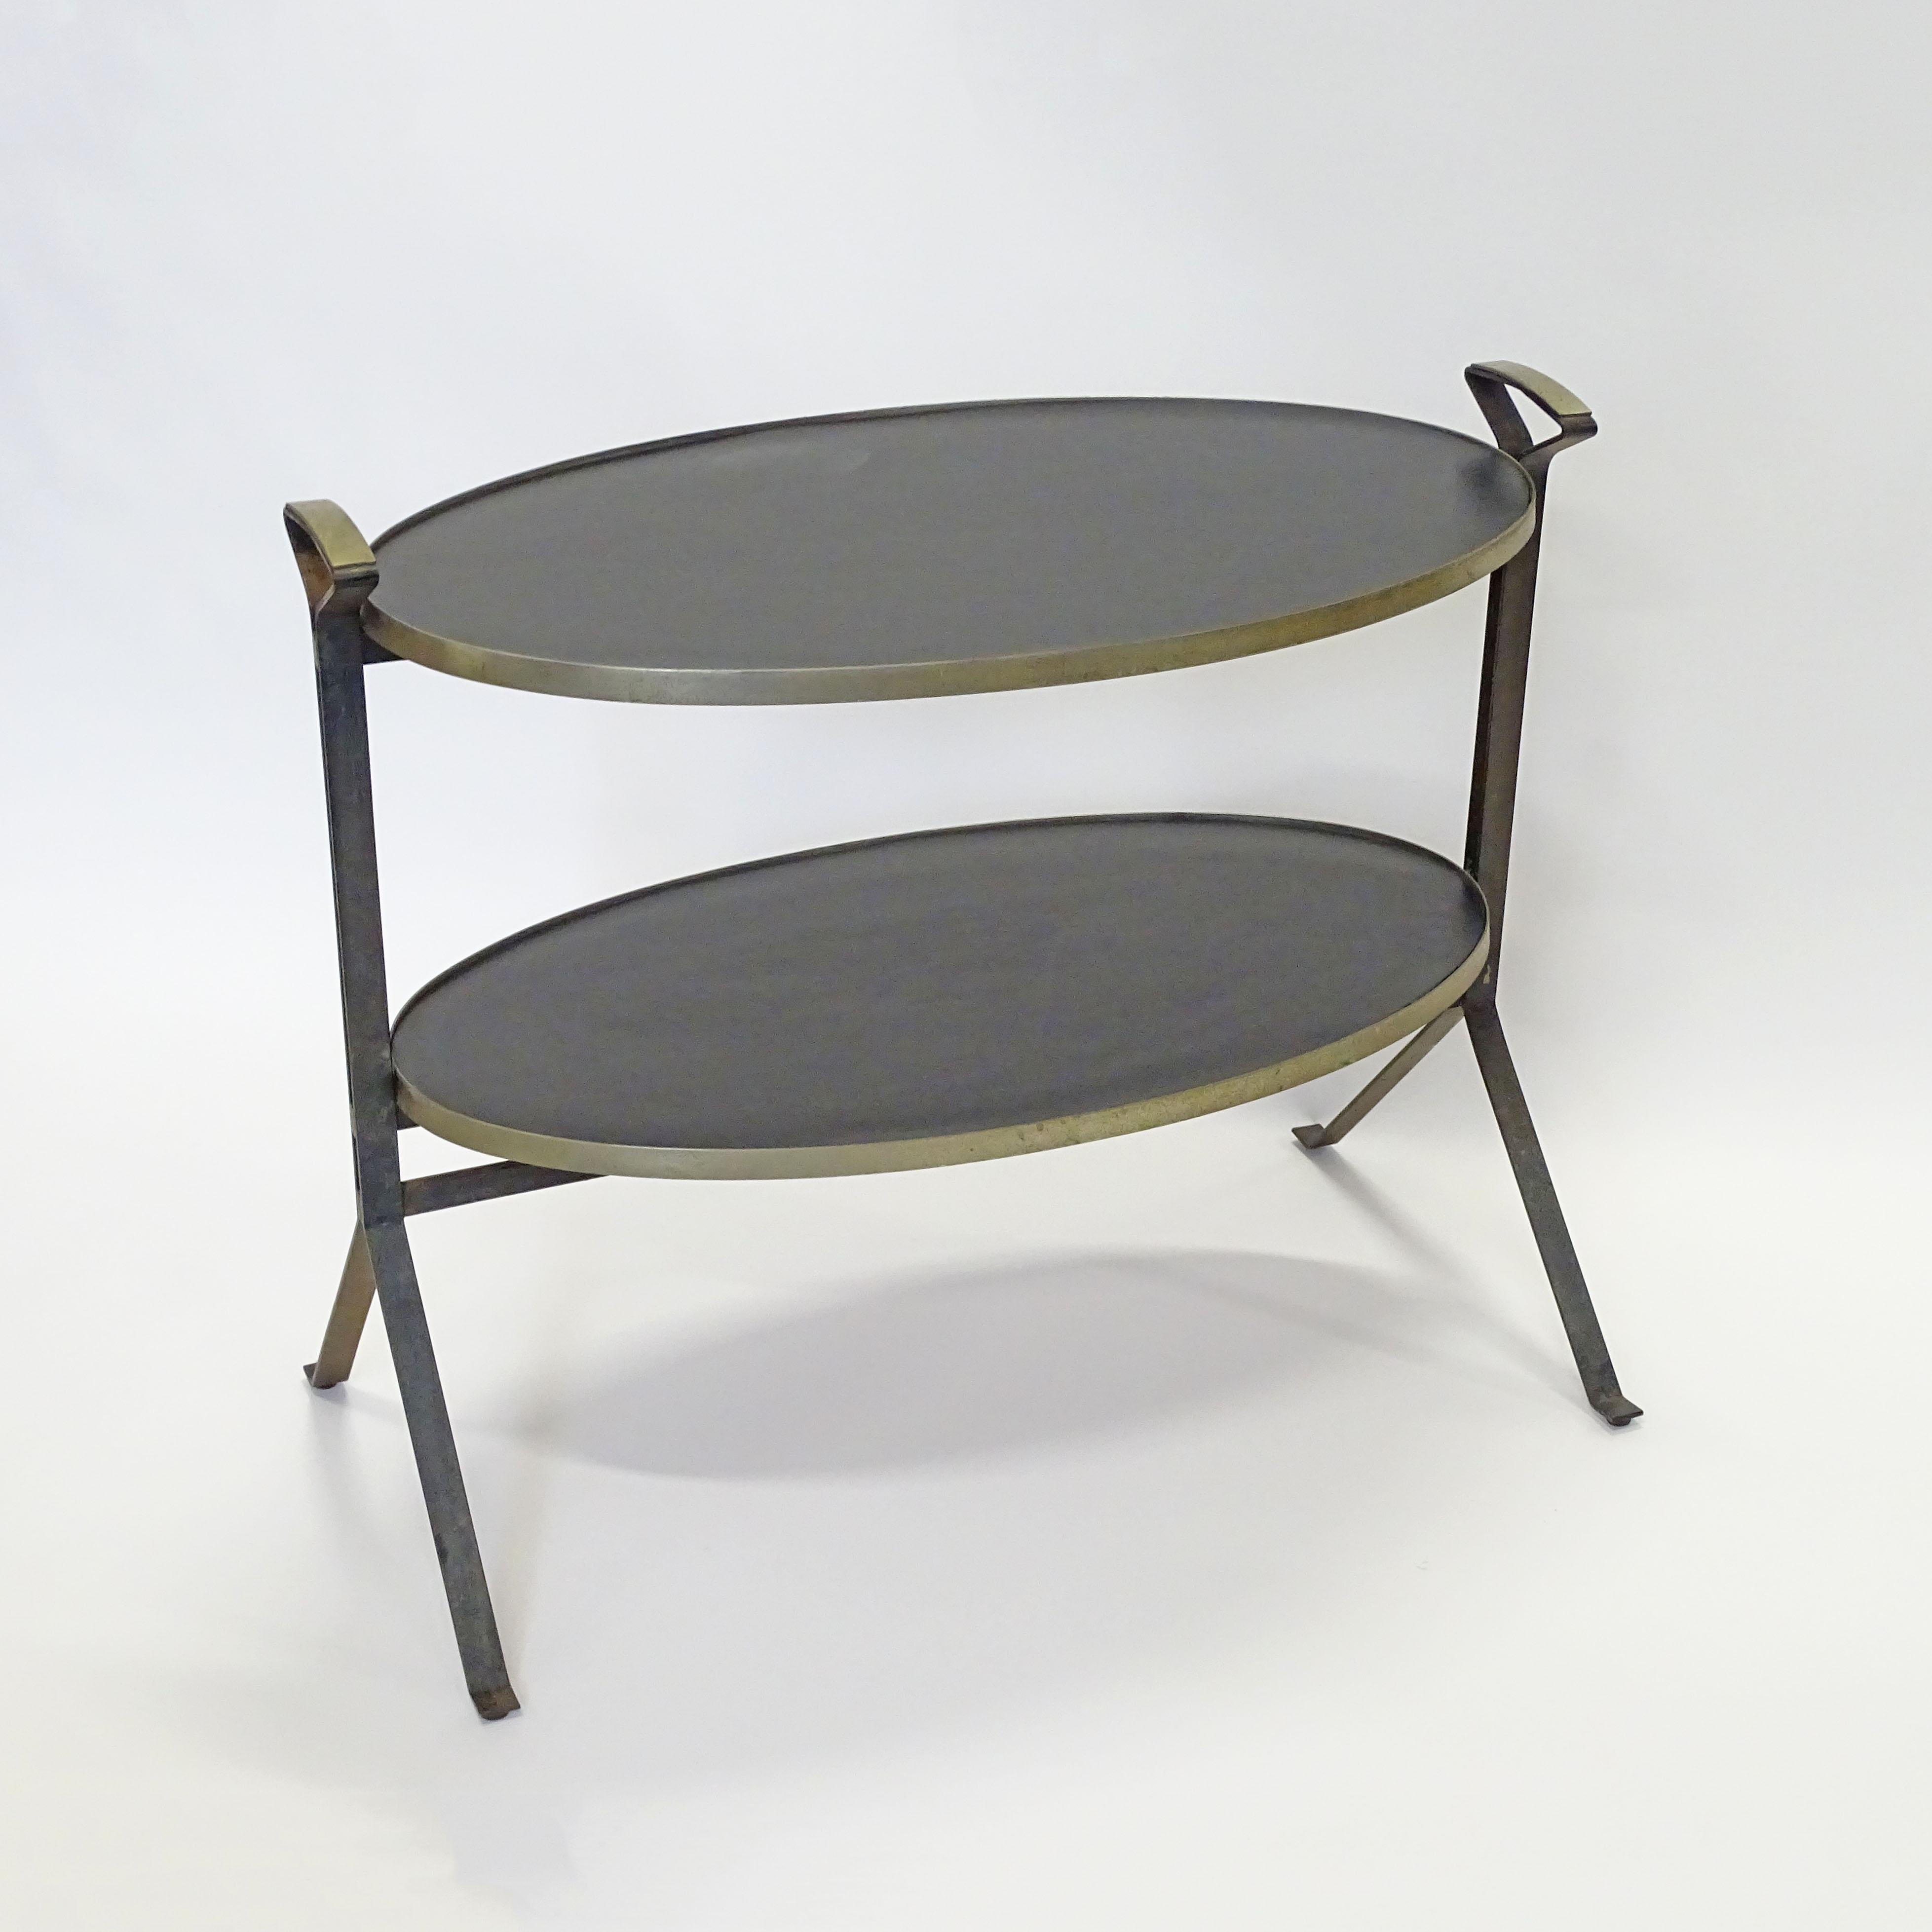 Architectural Oval Two Tier Serving Table with Handles, Italy, 1950s For Sale 2